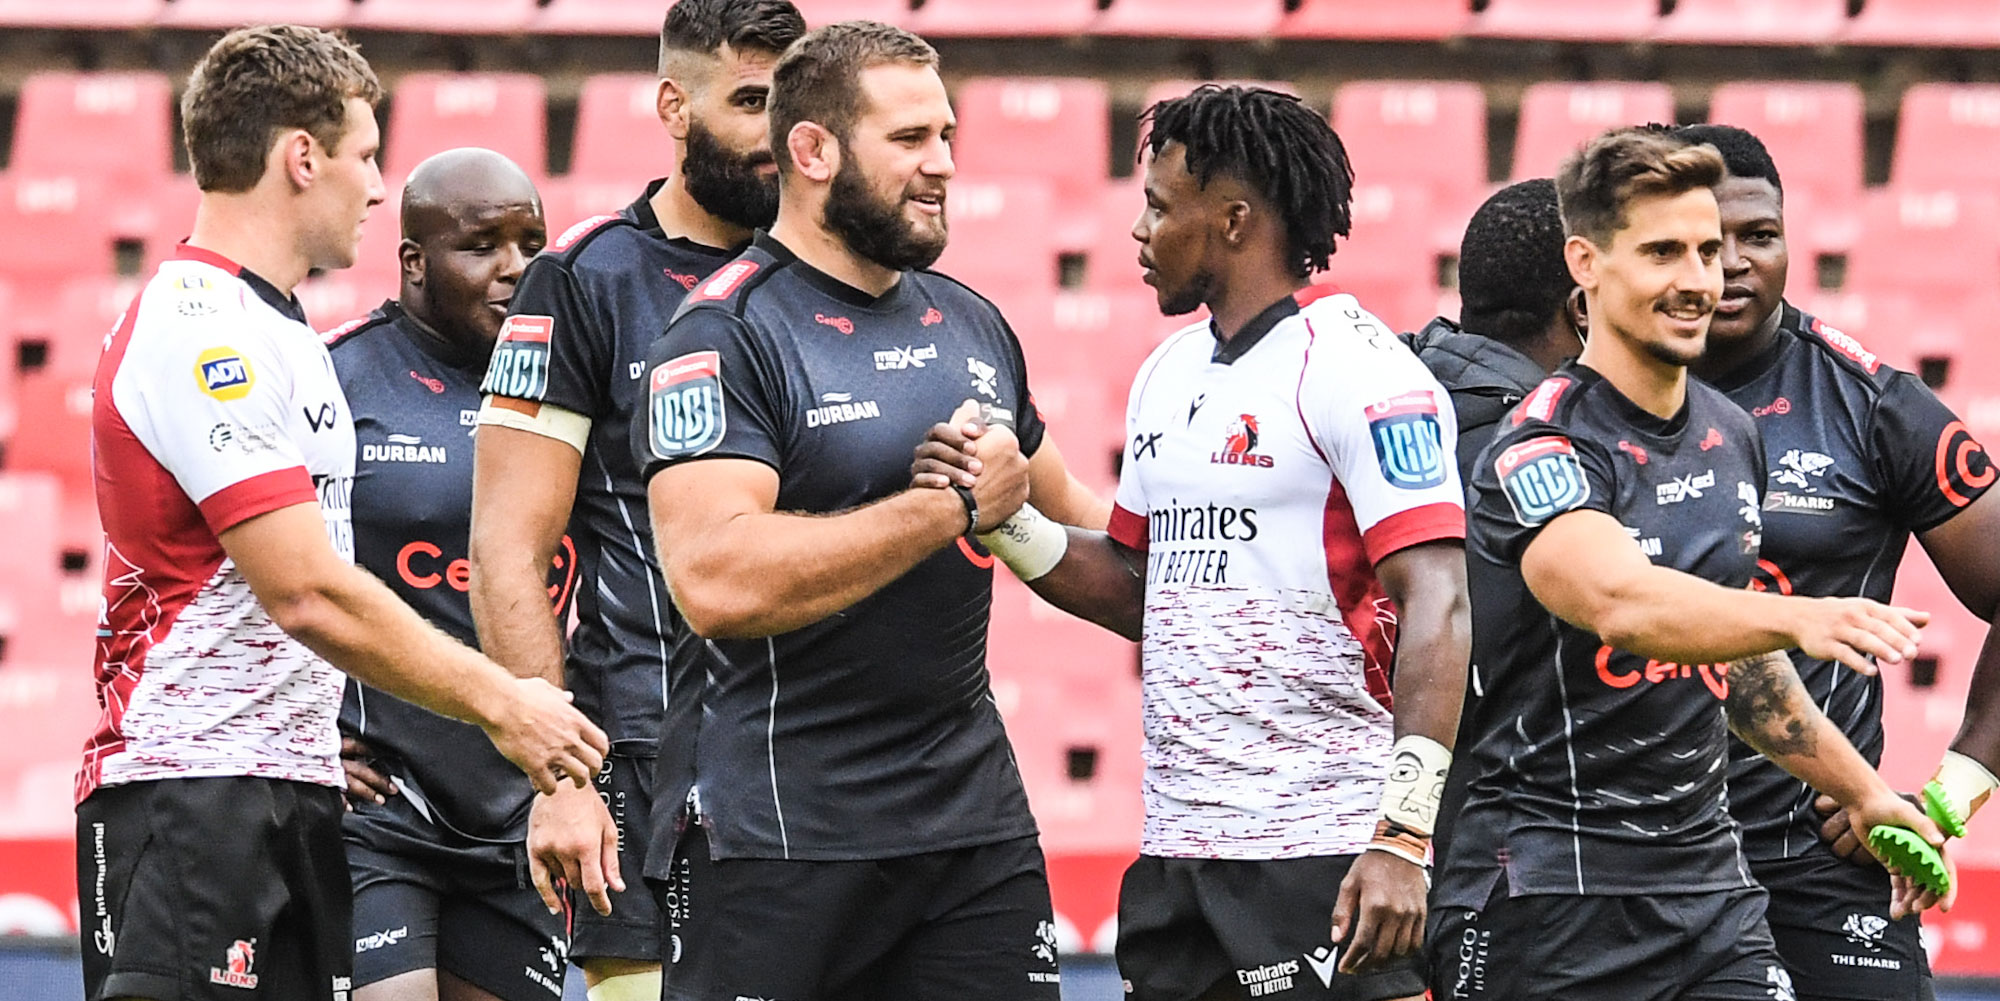 Thomas du Toit and Rabz Maxwane after last weekend's clash in Johannesburg.